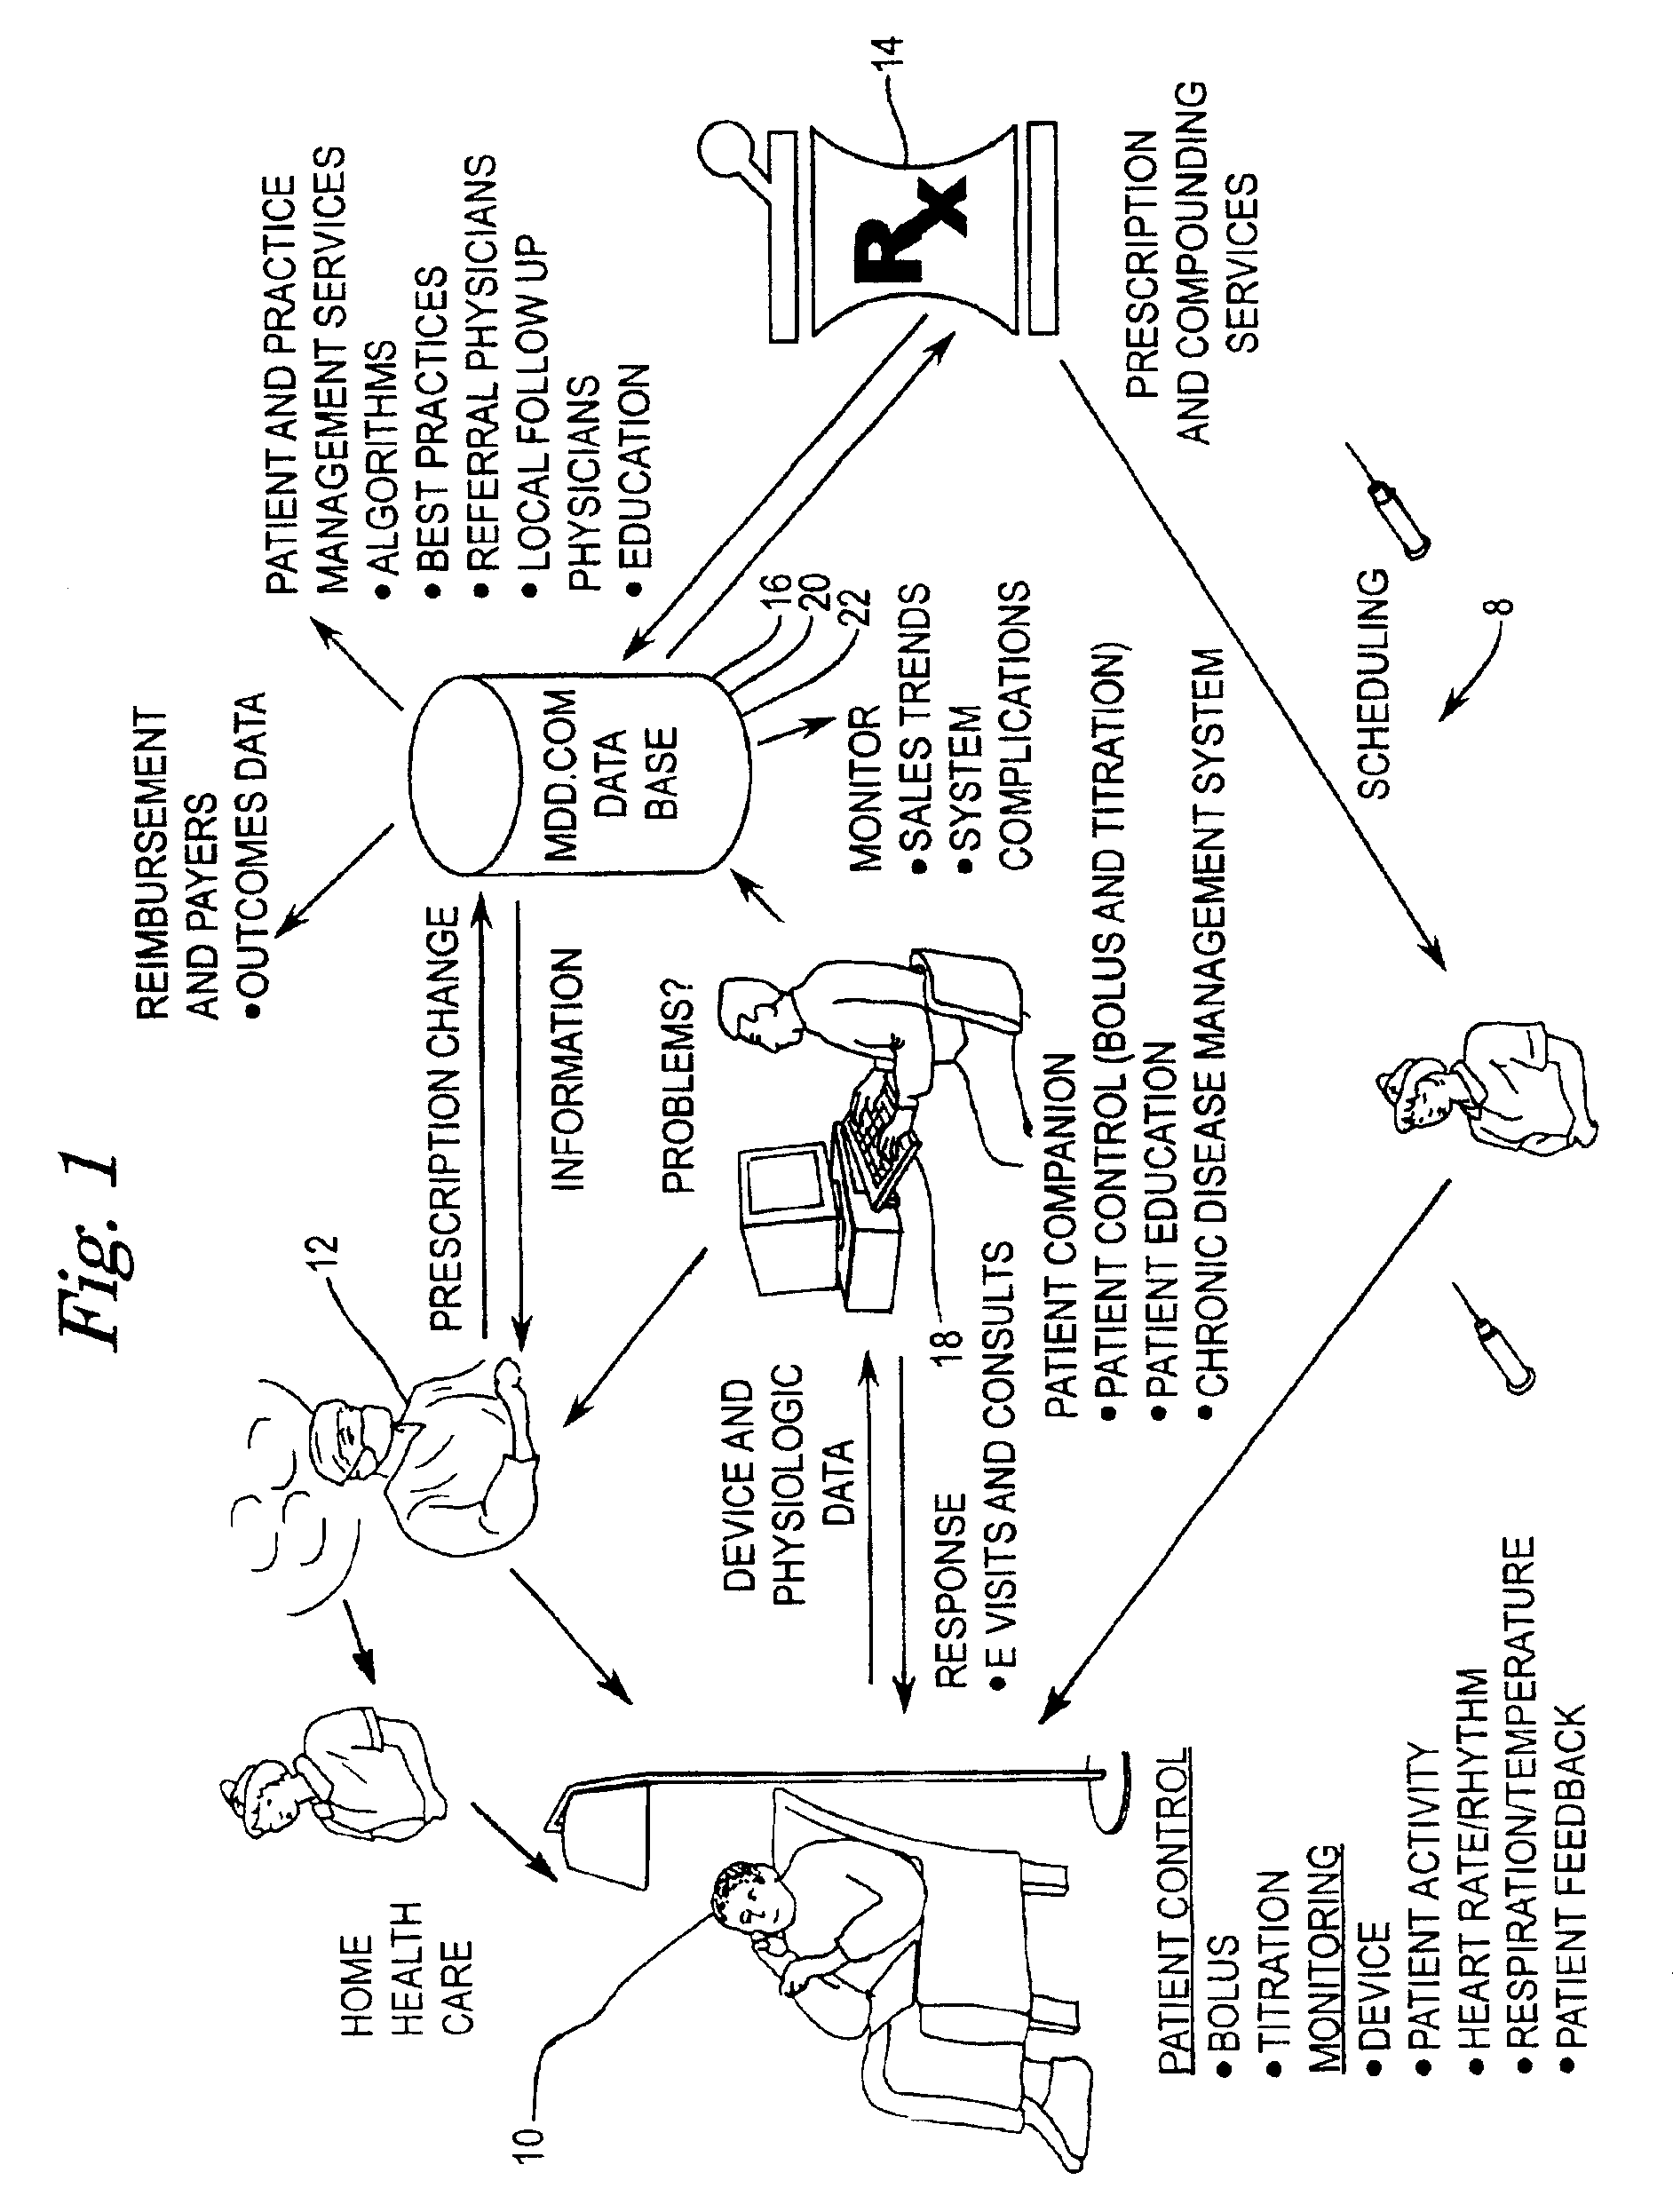 Implantable therapeutic substance infusion device configuration system